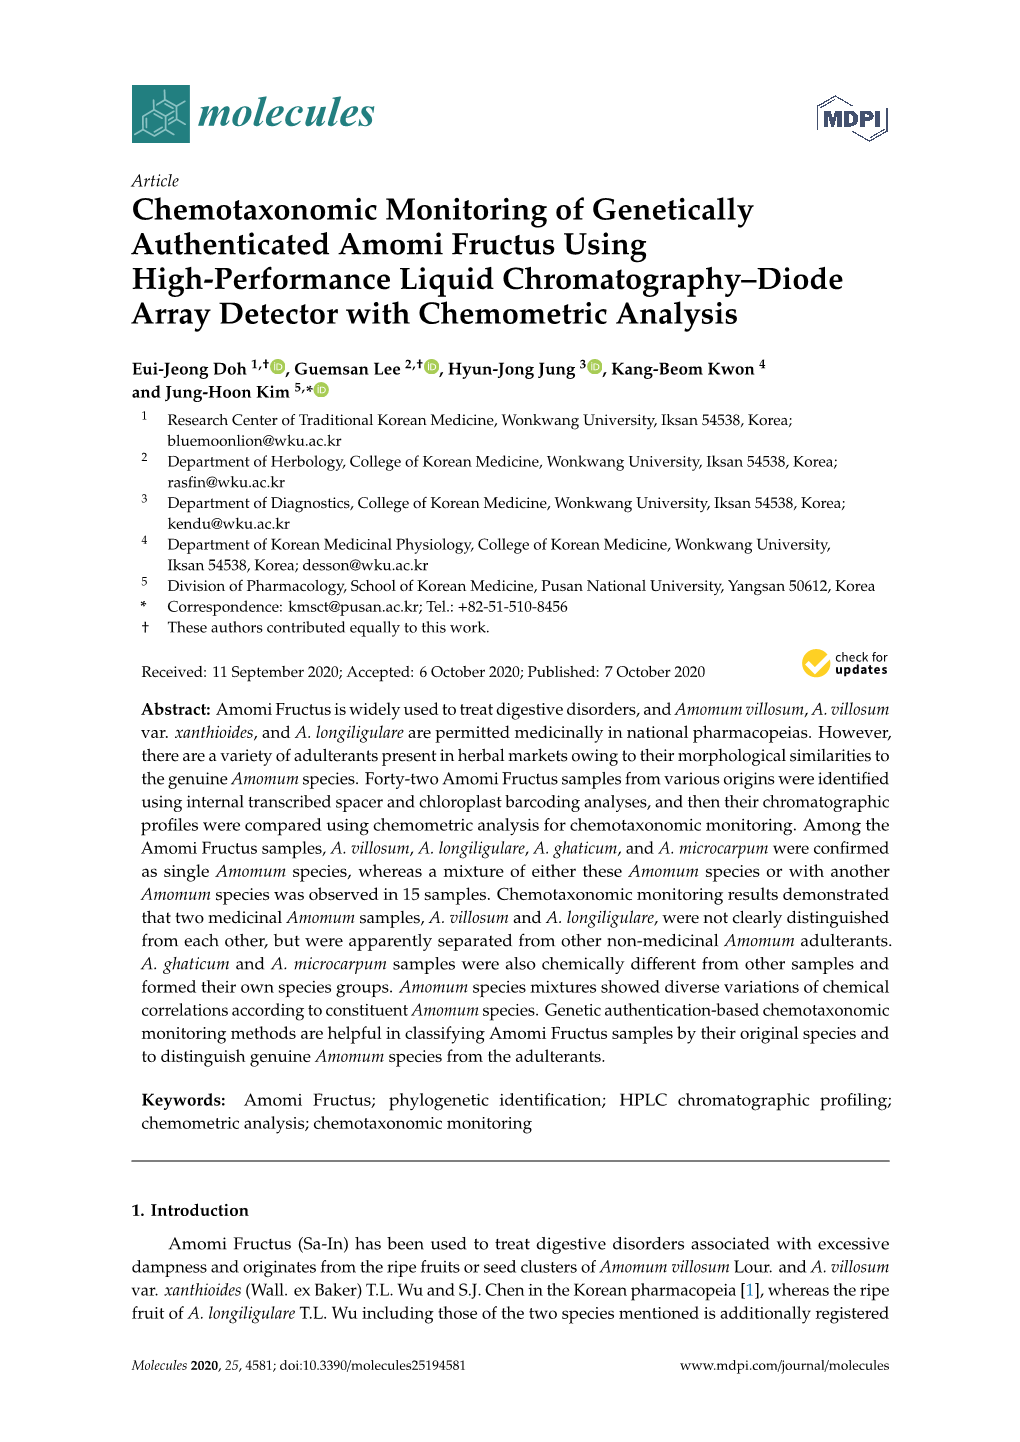 Chemotaxonomic Monitoring of Genetically Authenticated Amomi Fructus Using High-Performance Liquid Chromatography–Diode Array Detector with Chemometric Analysis